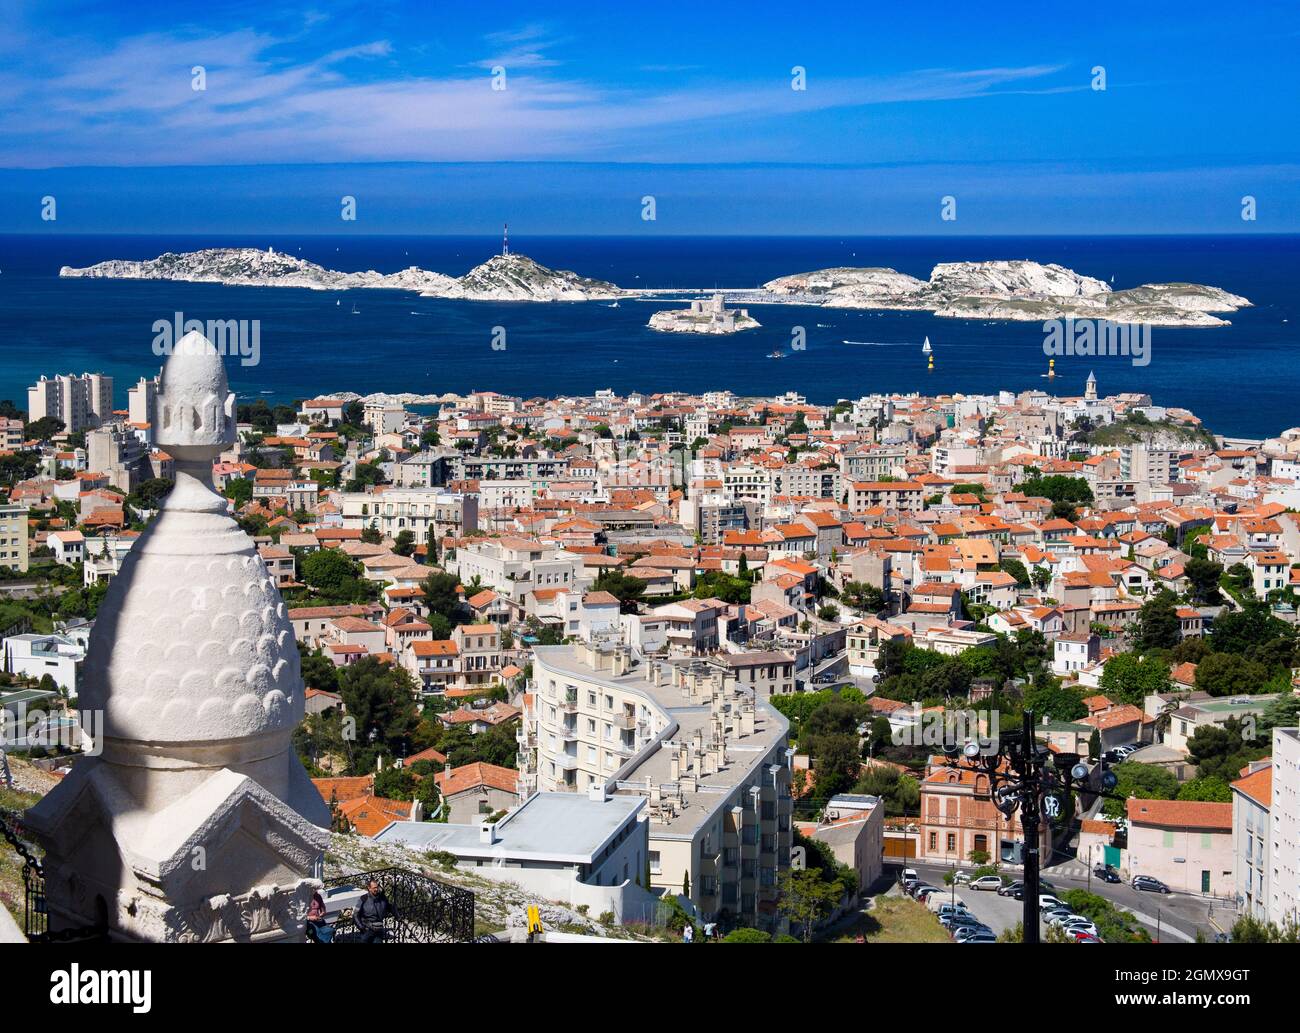 Marseilles, France - 20 June 2013; several people in view. Notre-Dame de la Garde (Our Lady of the Guard), is a Catholic basilica in Marseille, France Stock Photo